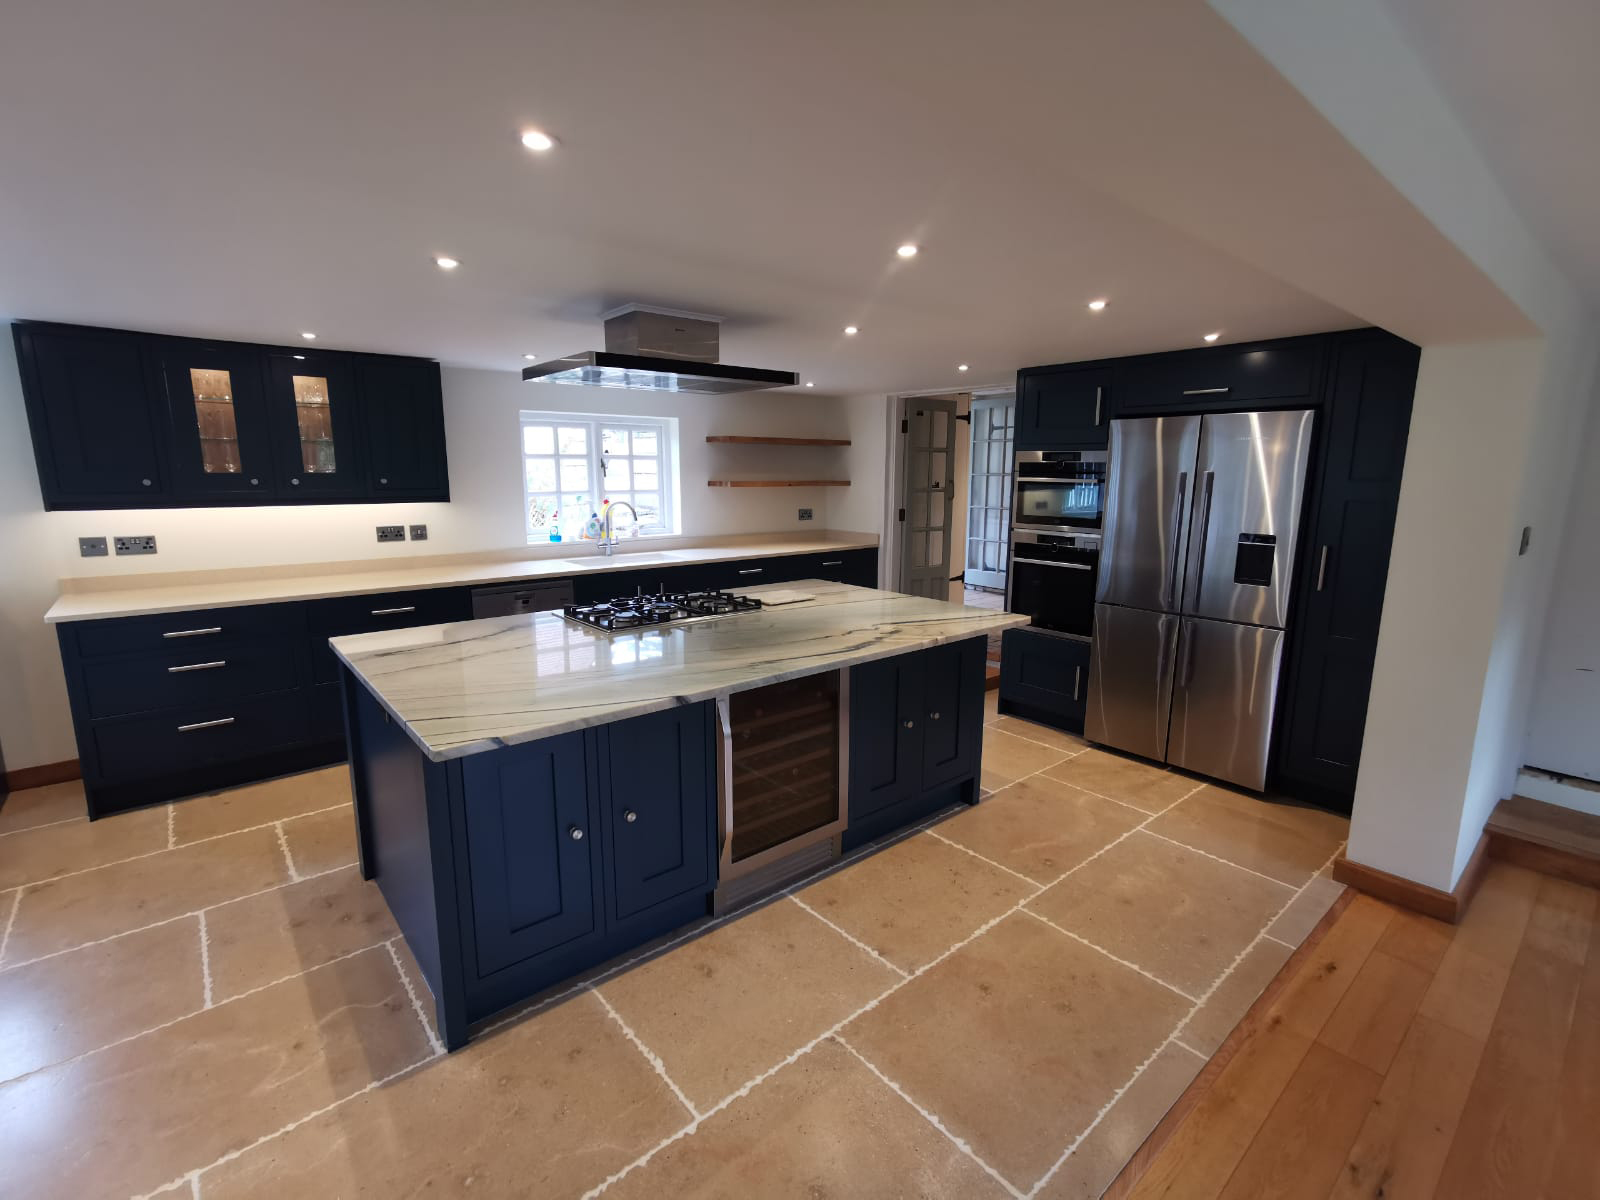 TCI Suffolk fully renovated kitchen and utility room for a house in Halstead, Essex.